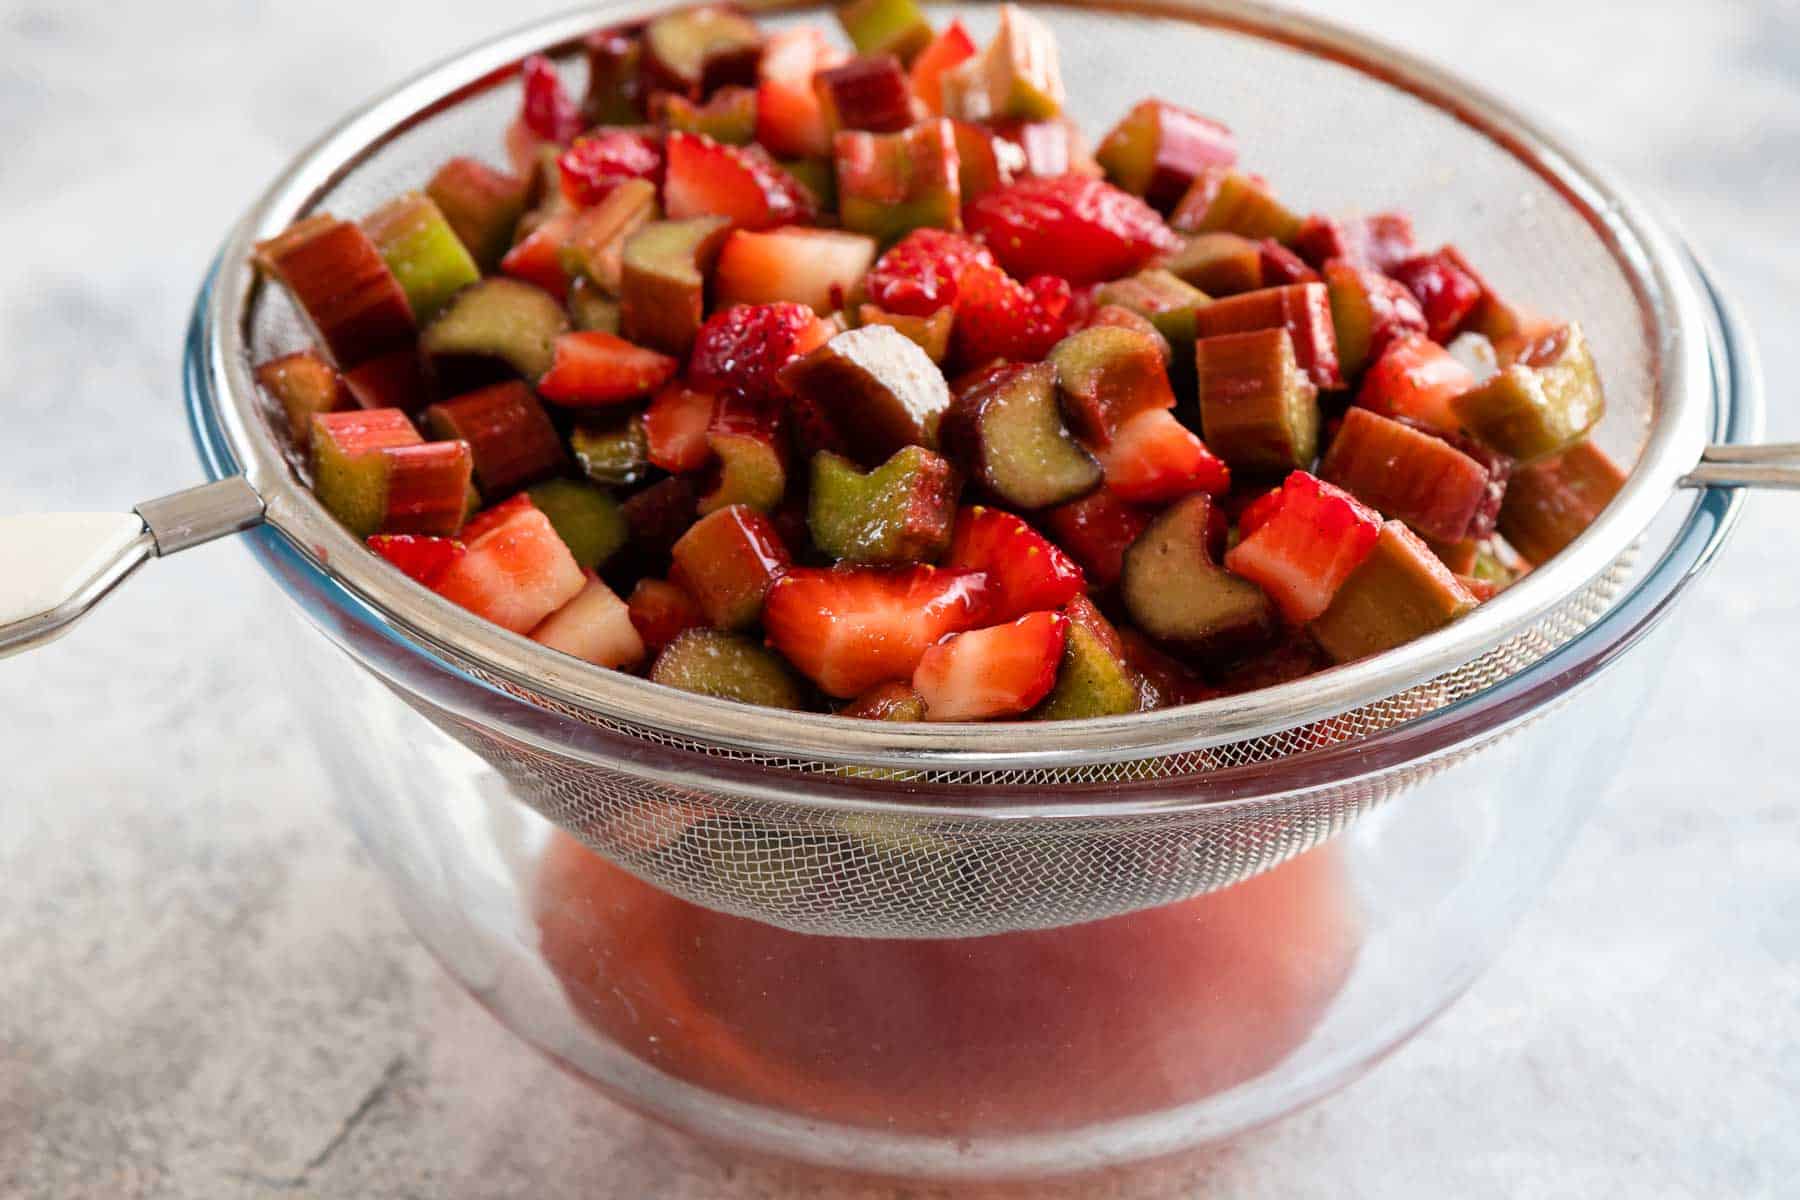 chopped and sugared strawberries and rhubarb in a mesh strainer placed on top of a bowl